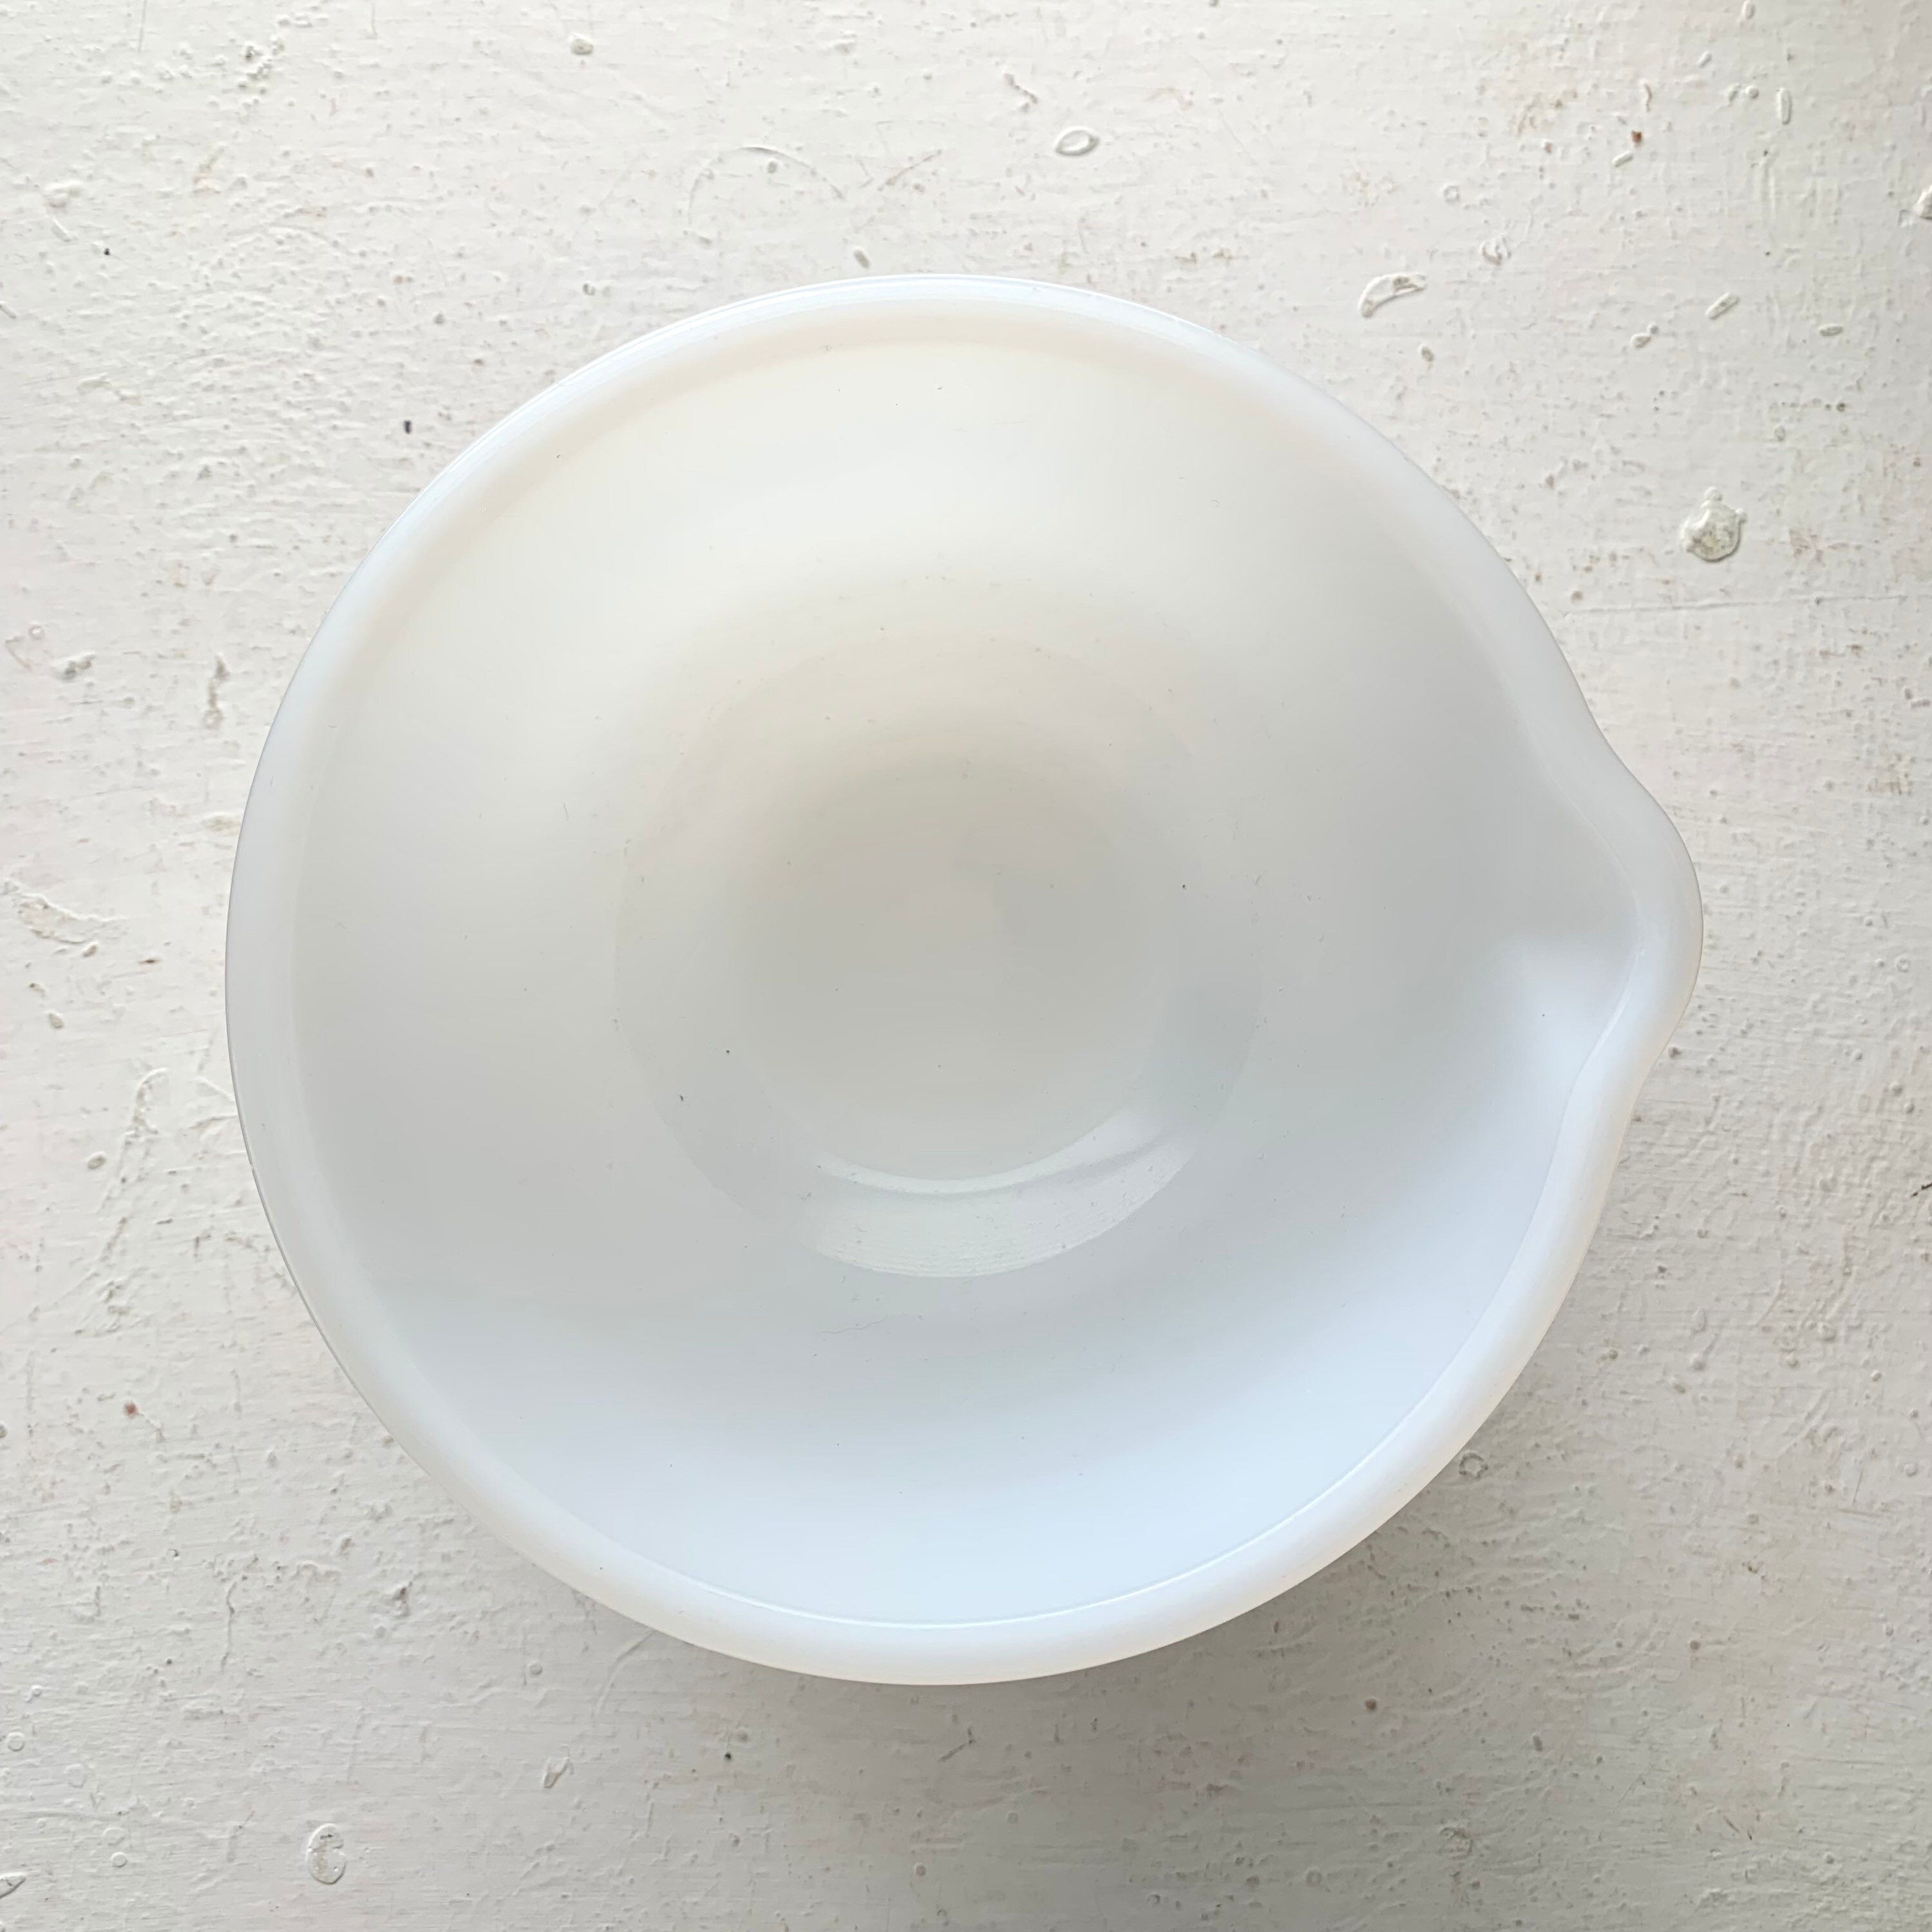 Small Sunbeam Mixmaster Glasbake Milk Glass Mixing Bowl - Vintage – Juner  and Bec